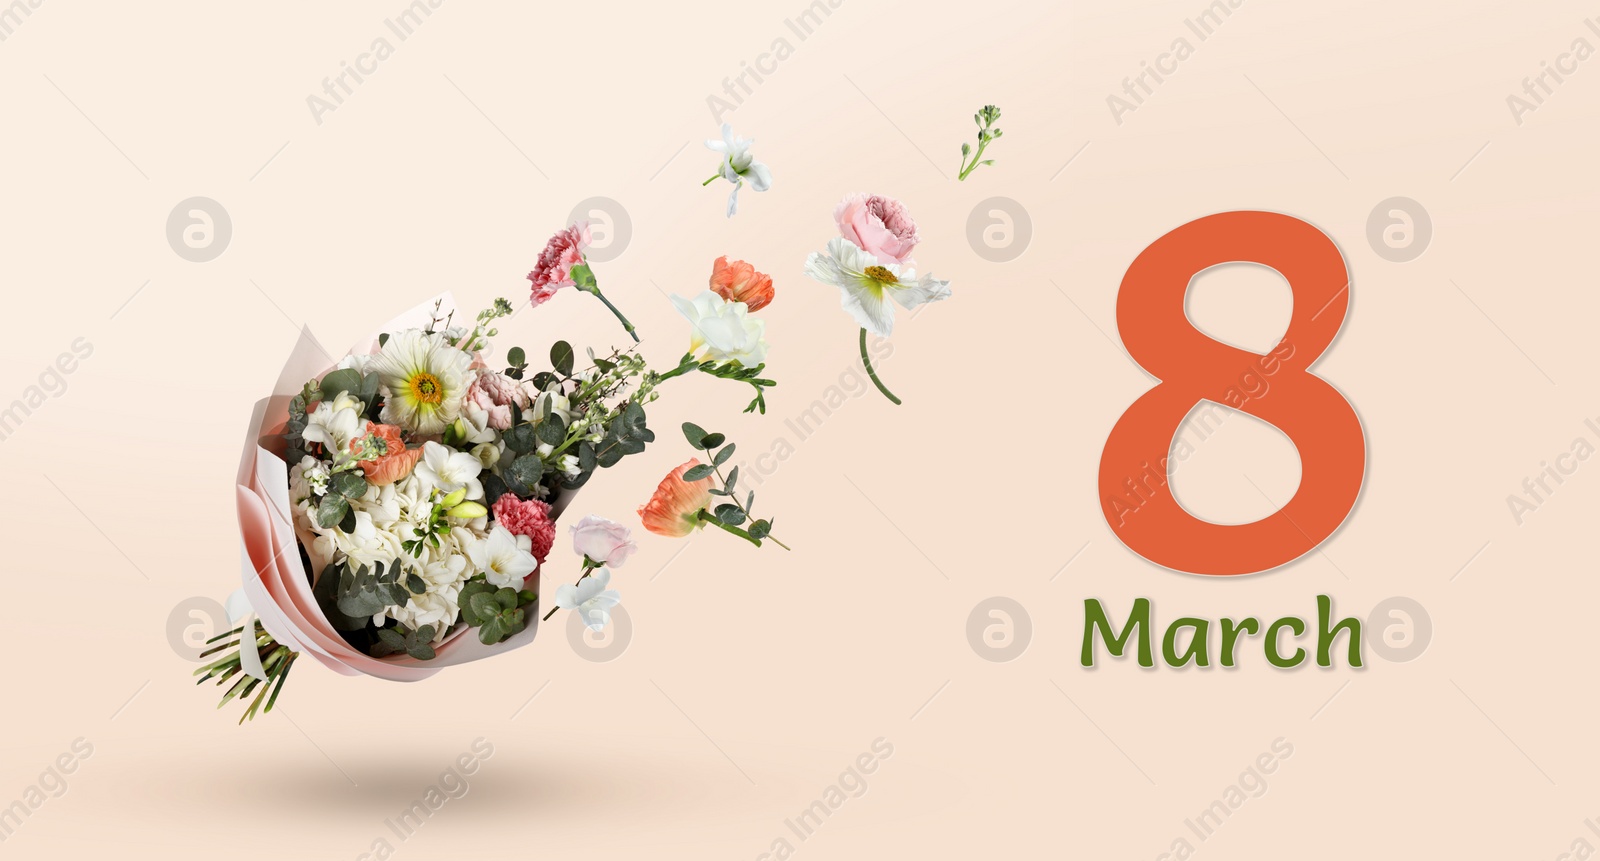 Image of March 8 - International Women's Day. Greeting card design with bouquet of beautiful flowers on beige background